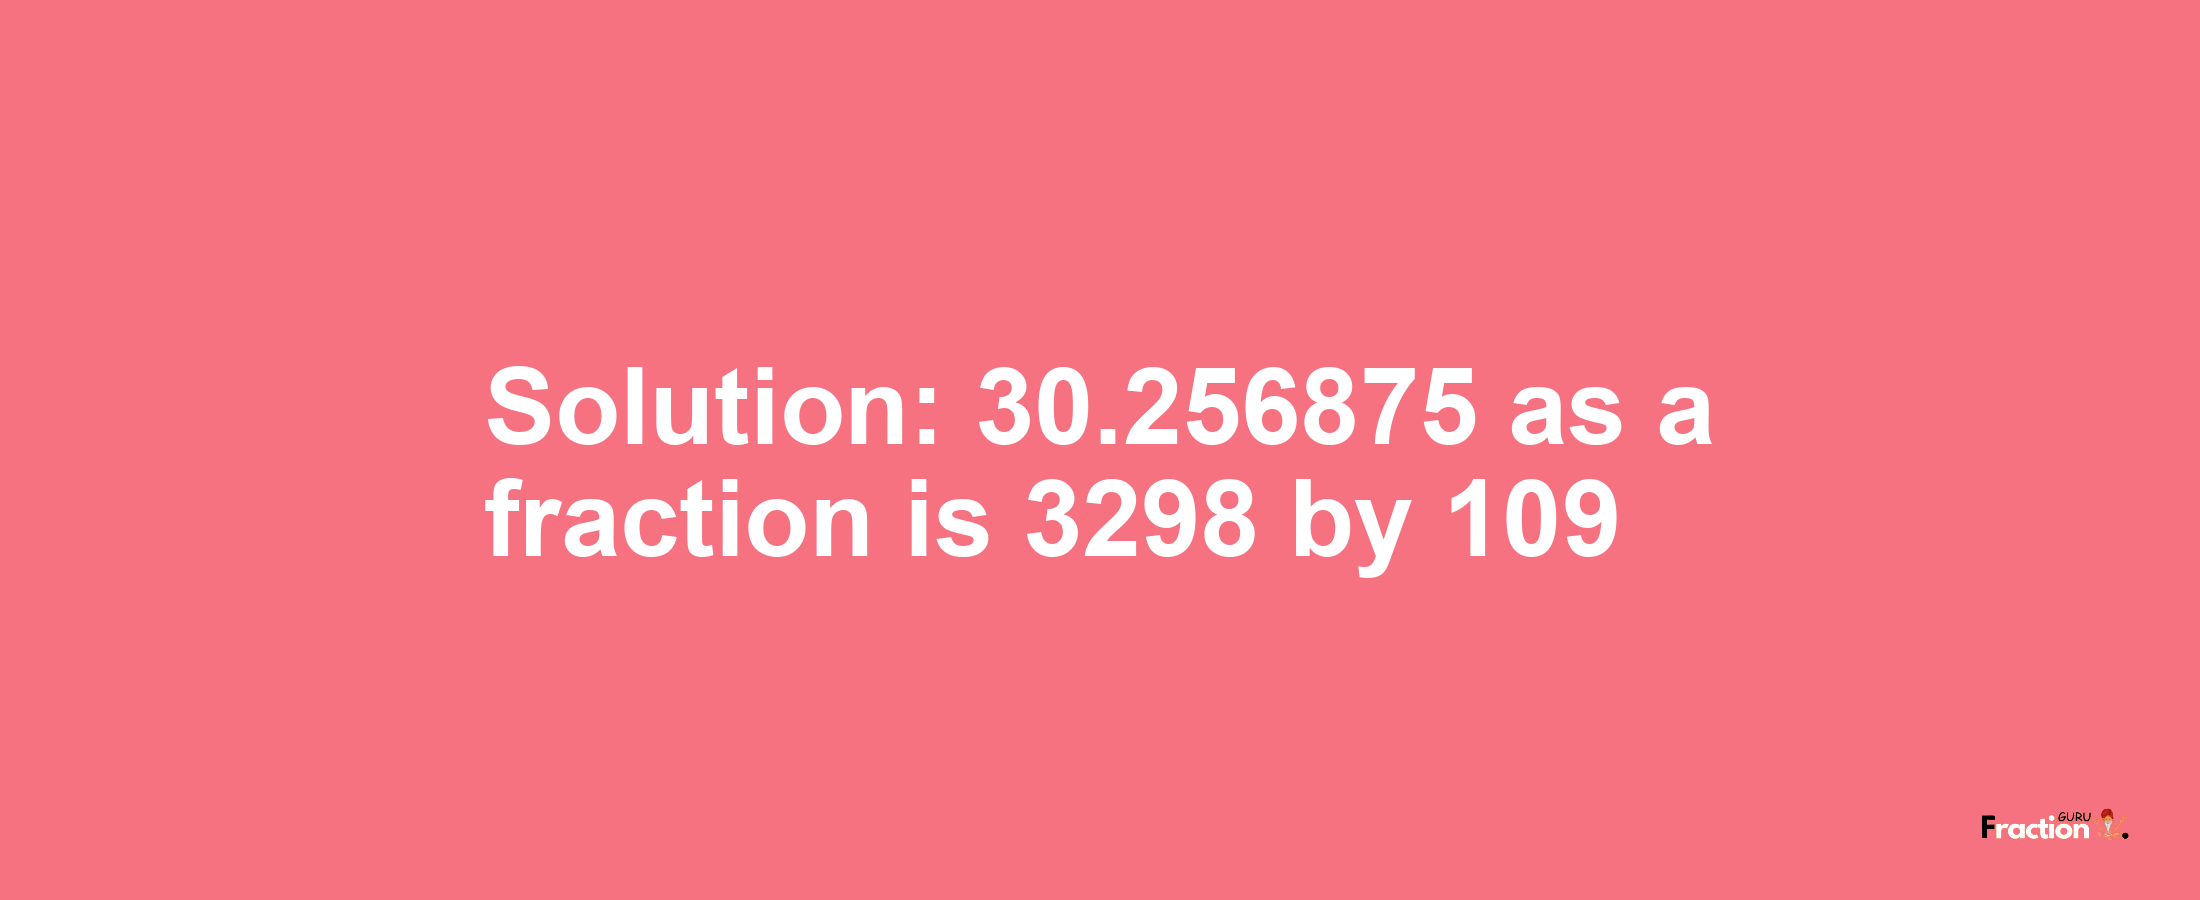 Solution:30.256875 as a fraction is 3298/109